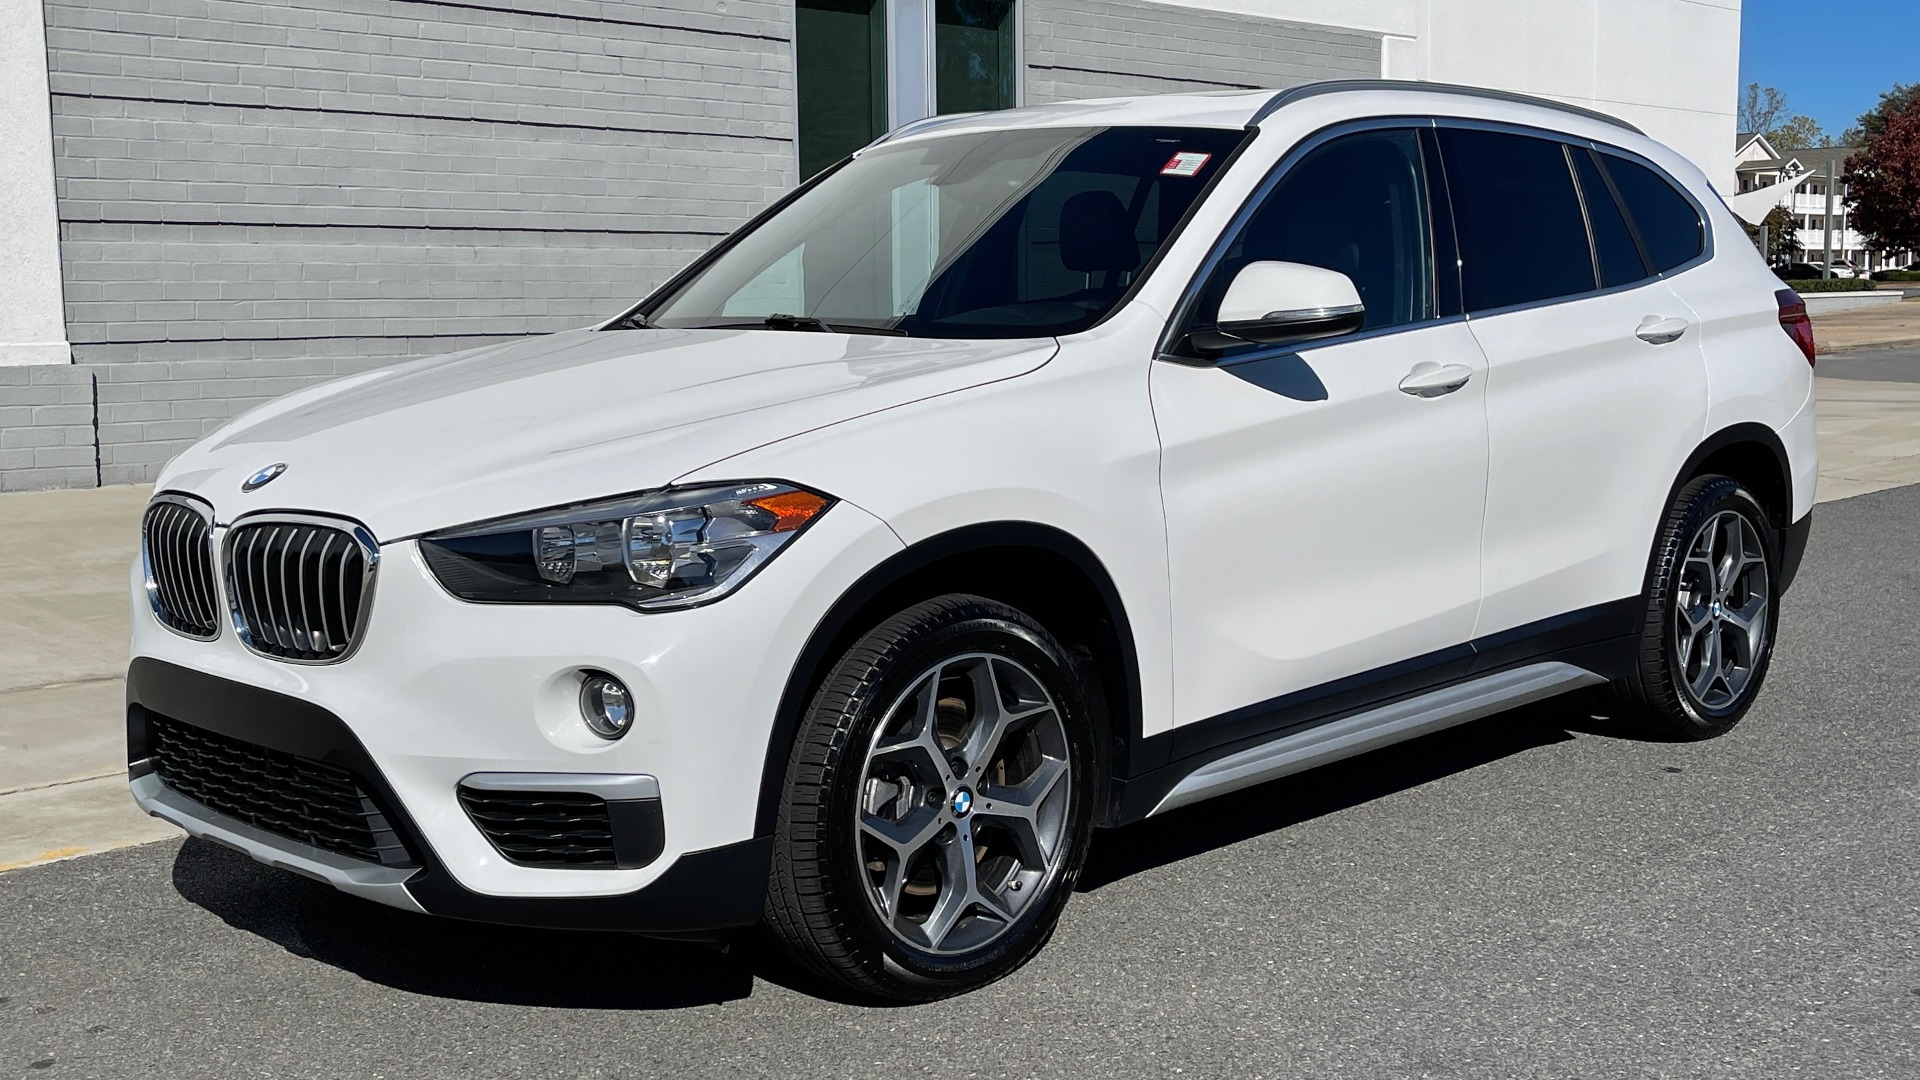 Used 2018 BMW X1 XDRIVE28I 2.0L / CONVENIENCE PKG / PANO-ROOF / REARVIEW for sale Sold at Formula Imports in Charlotte NC 28227 2